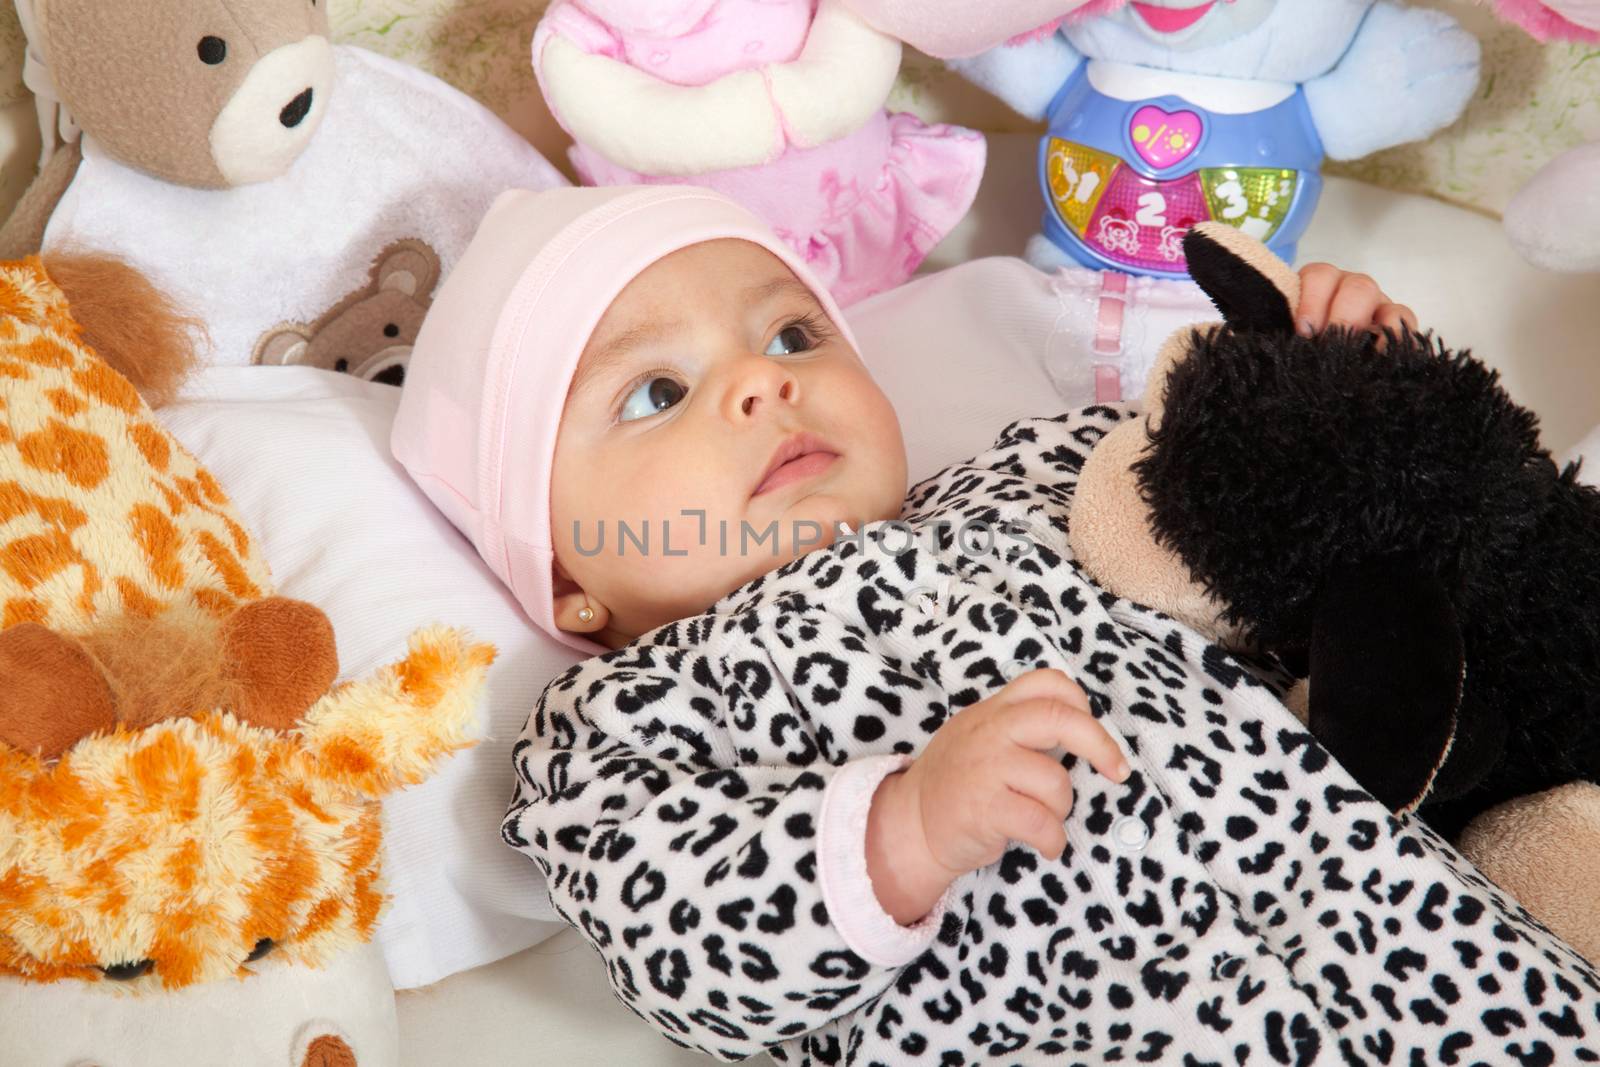 A baby girl dressed in animal print surrounded by stuffed animal by anamejia18